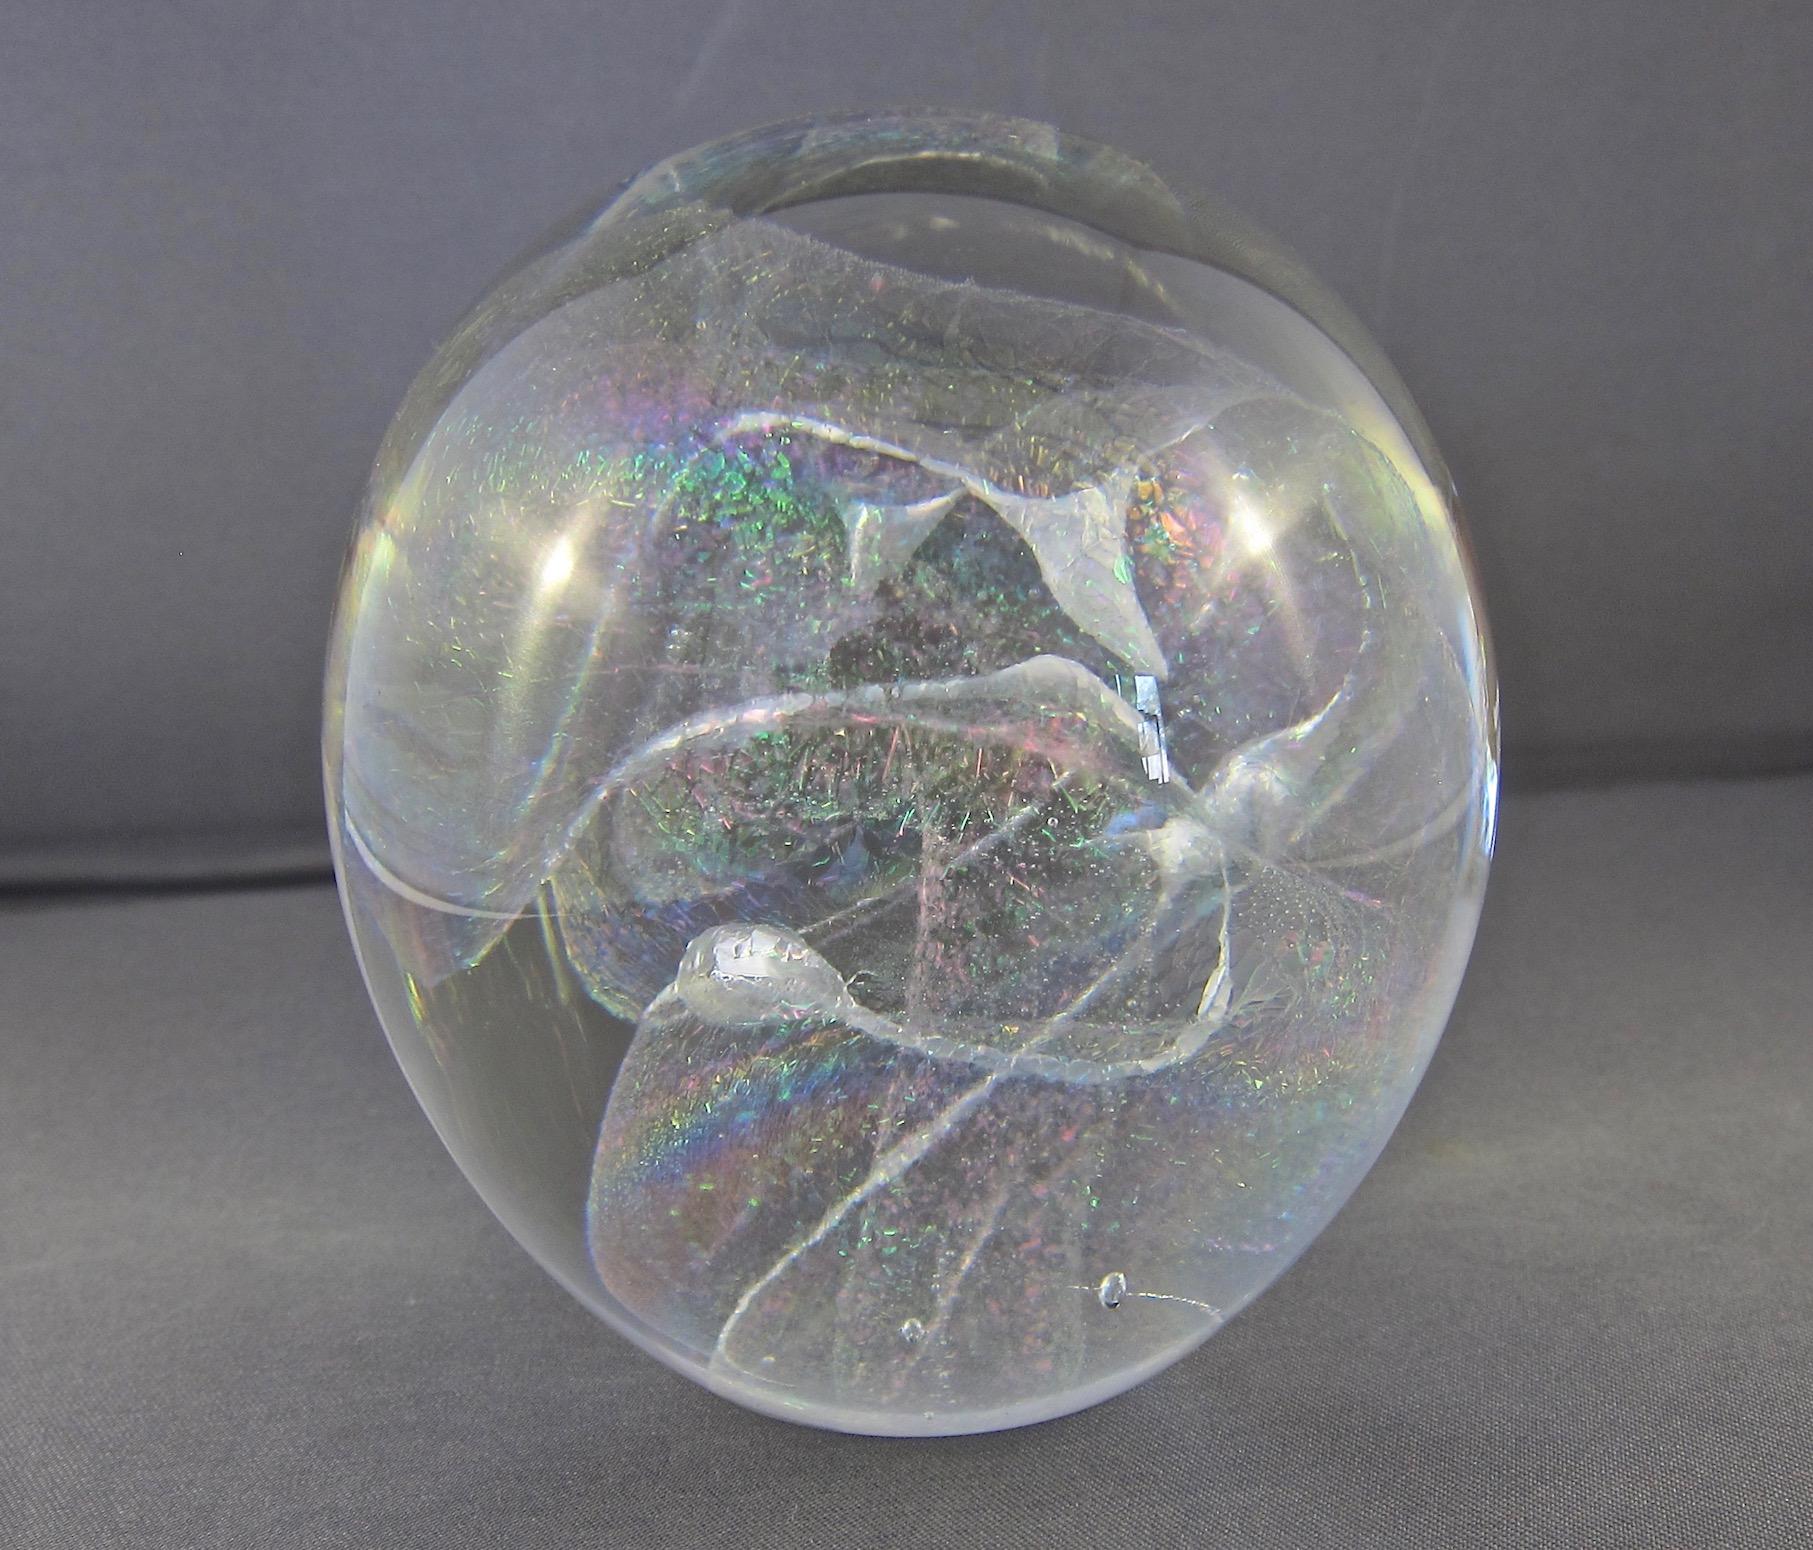 A signed vintage art glass paperweight by American glass artist, Robert W. Stephan dating to 1987. This clear glass sphere was handcrafted with colorful internal iridescence and swirls, creating sparkling color shifts that transform the design when